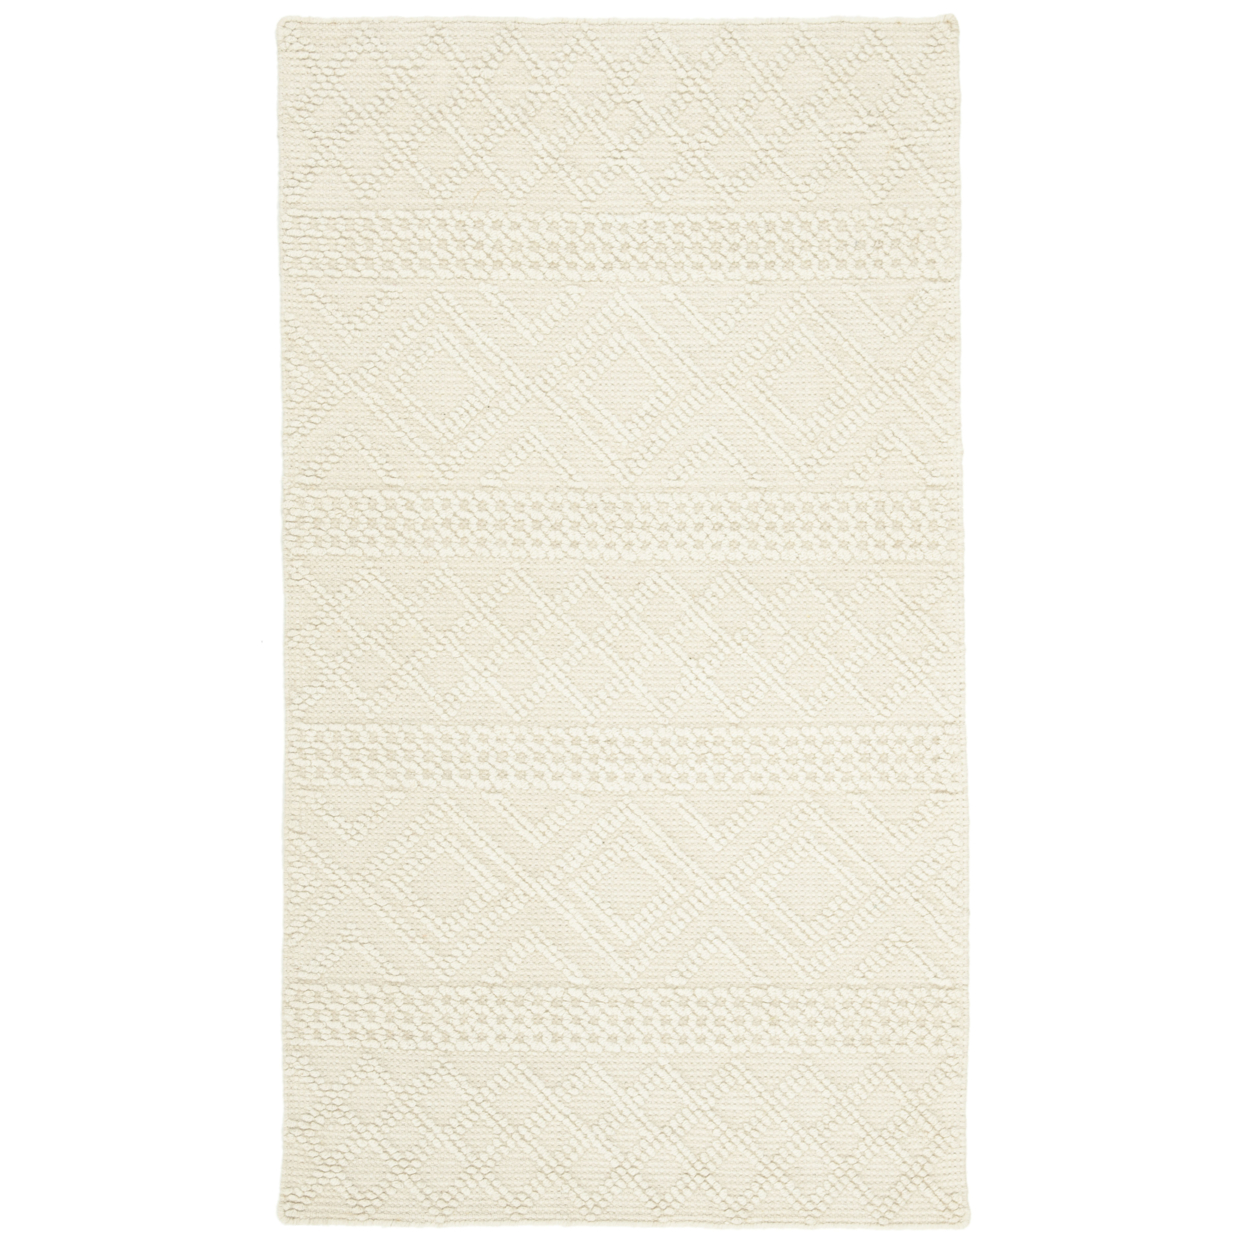 SAFAVIEH Vermont Collection VRM211A Handwoven Ivory Rug - 7' Square